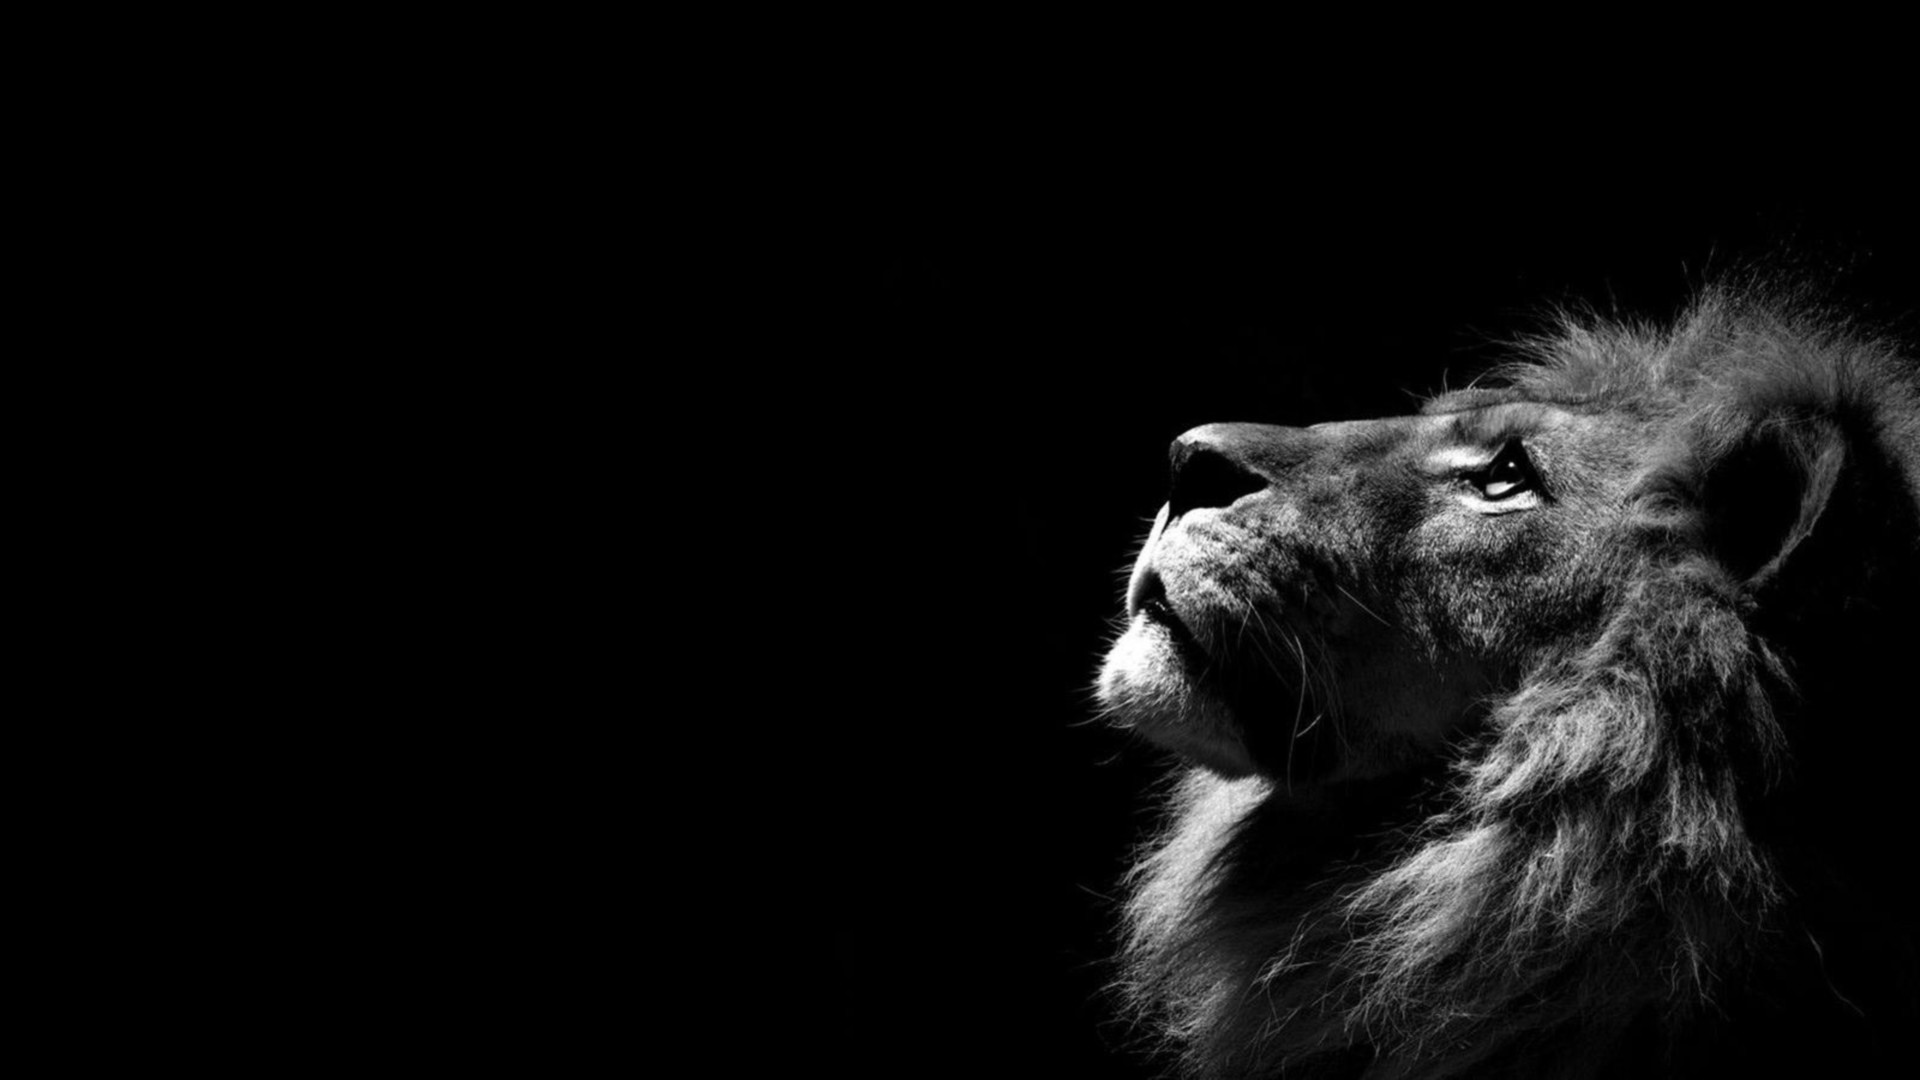 1920x1080 Download Free Lion: The Hunter | HD Wallpapers & Desktop Backgrounds